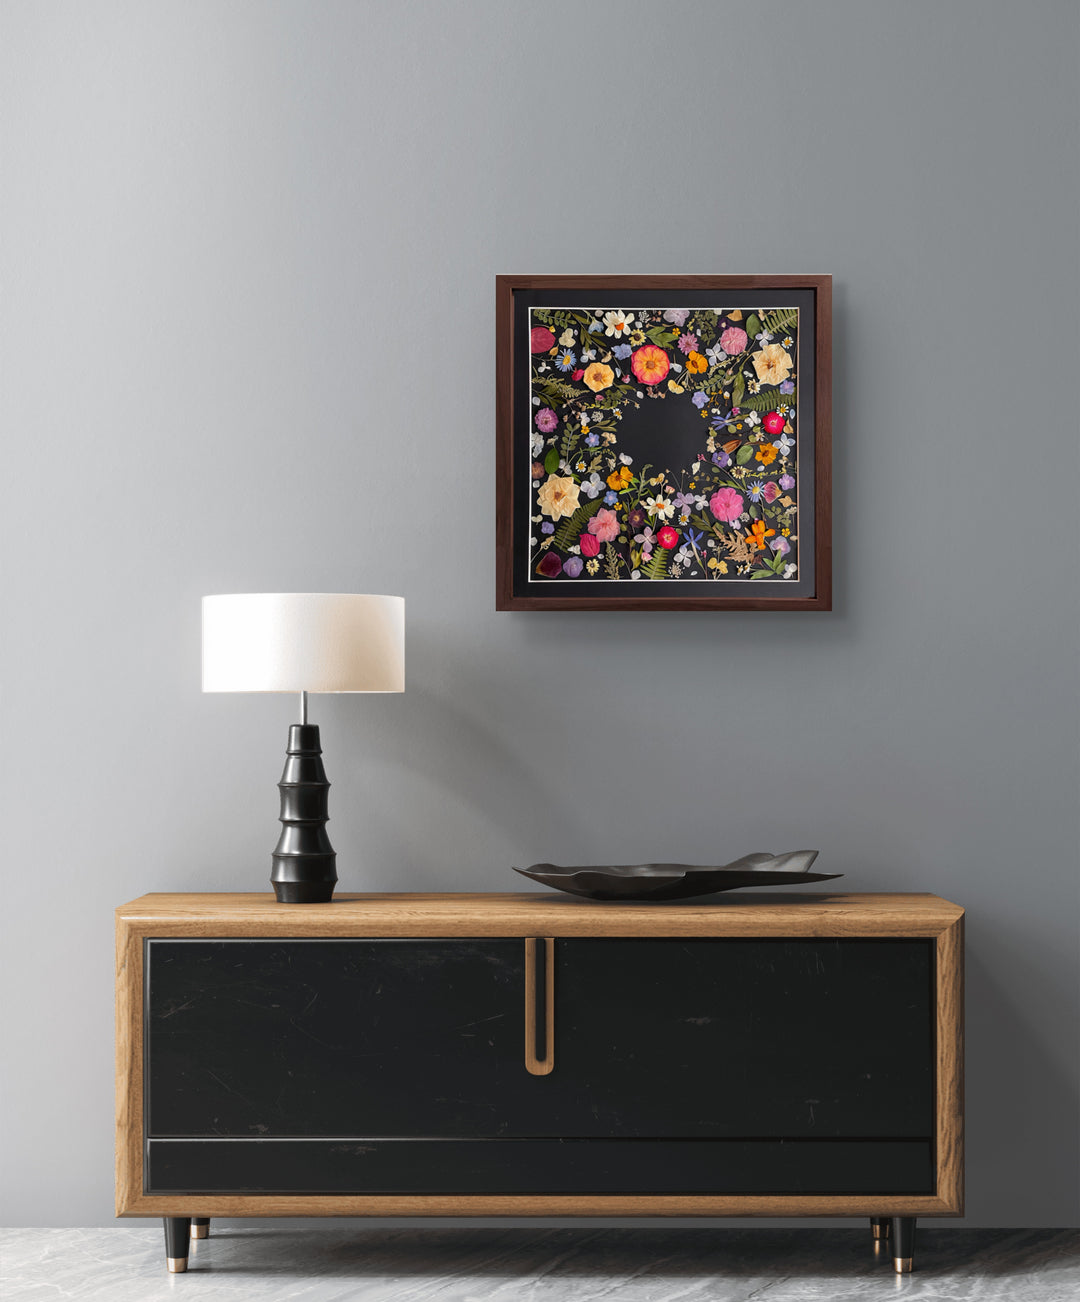 black background pressed flower frame art with flower petals hanging on the living room wall